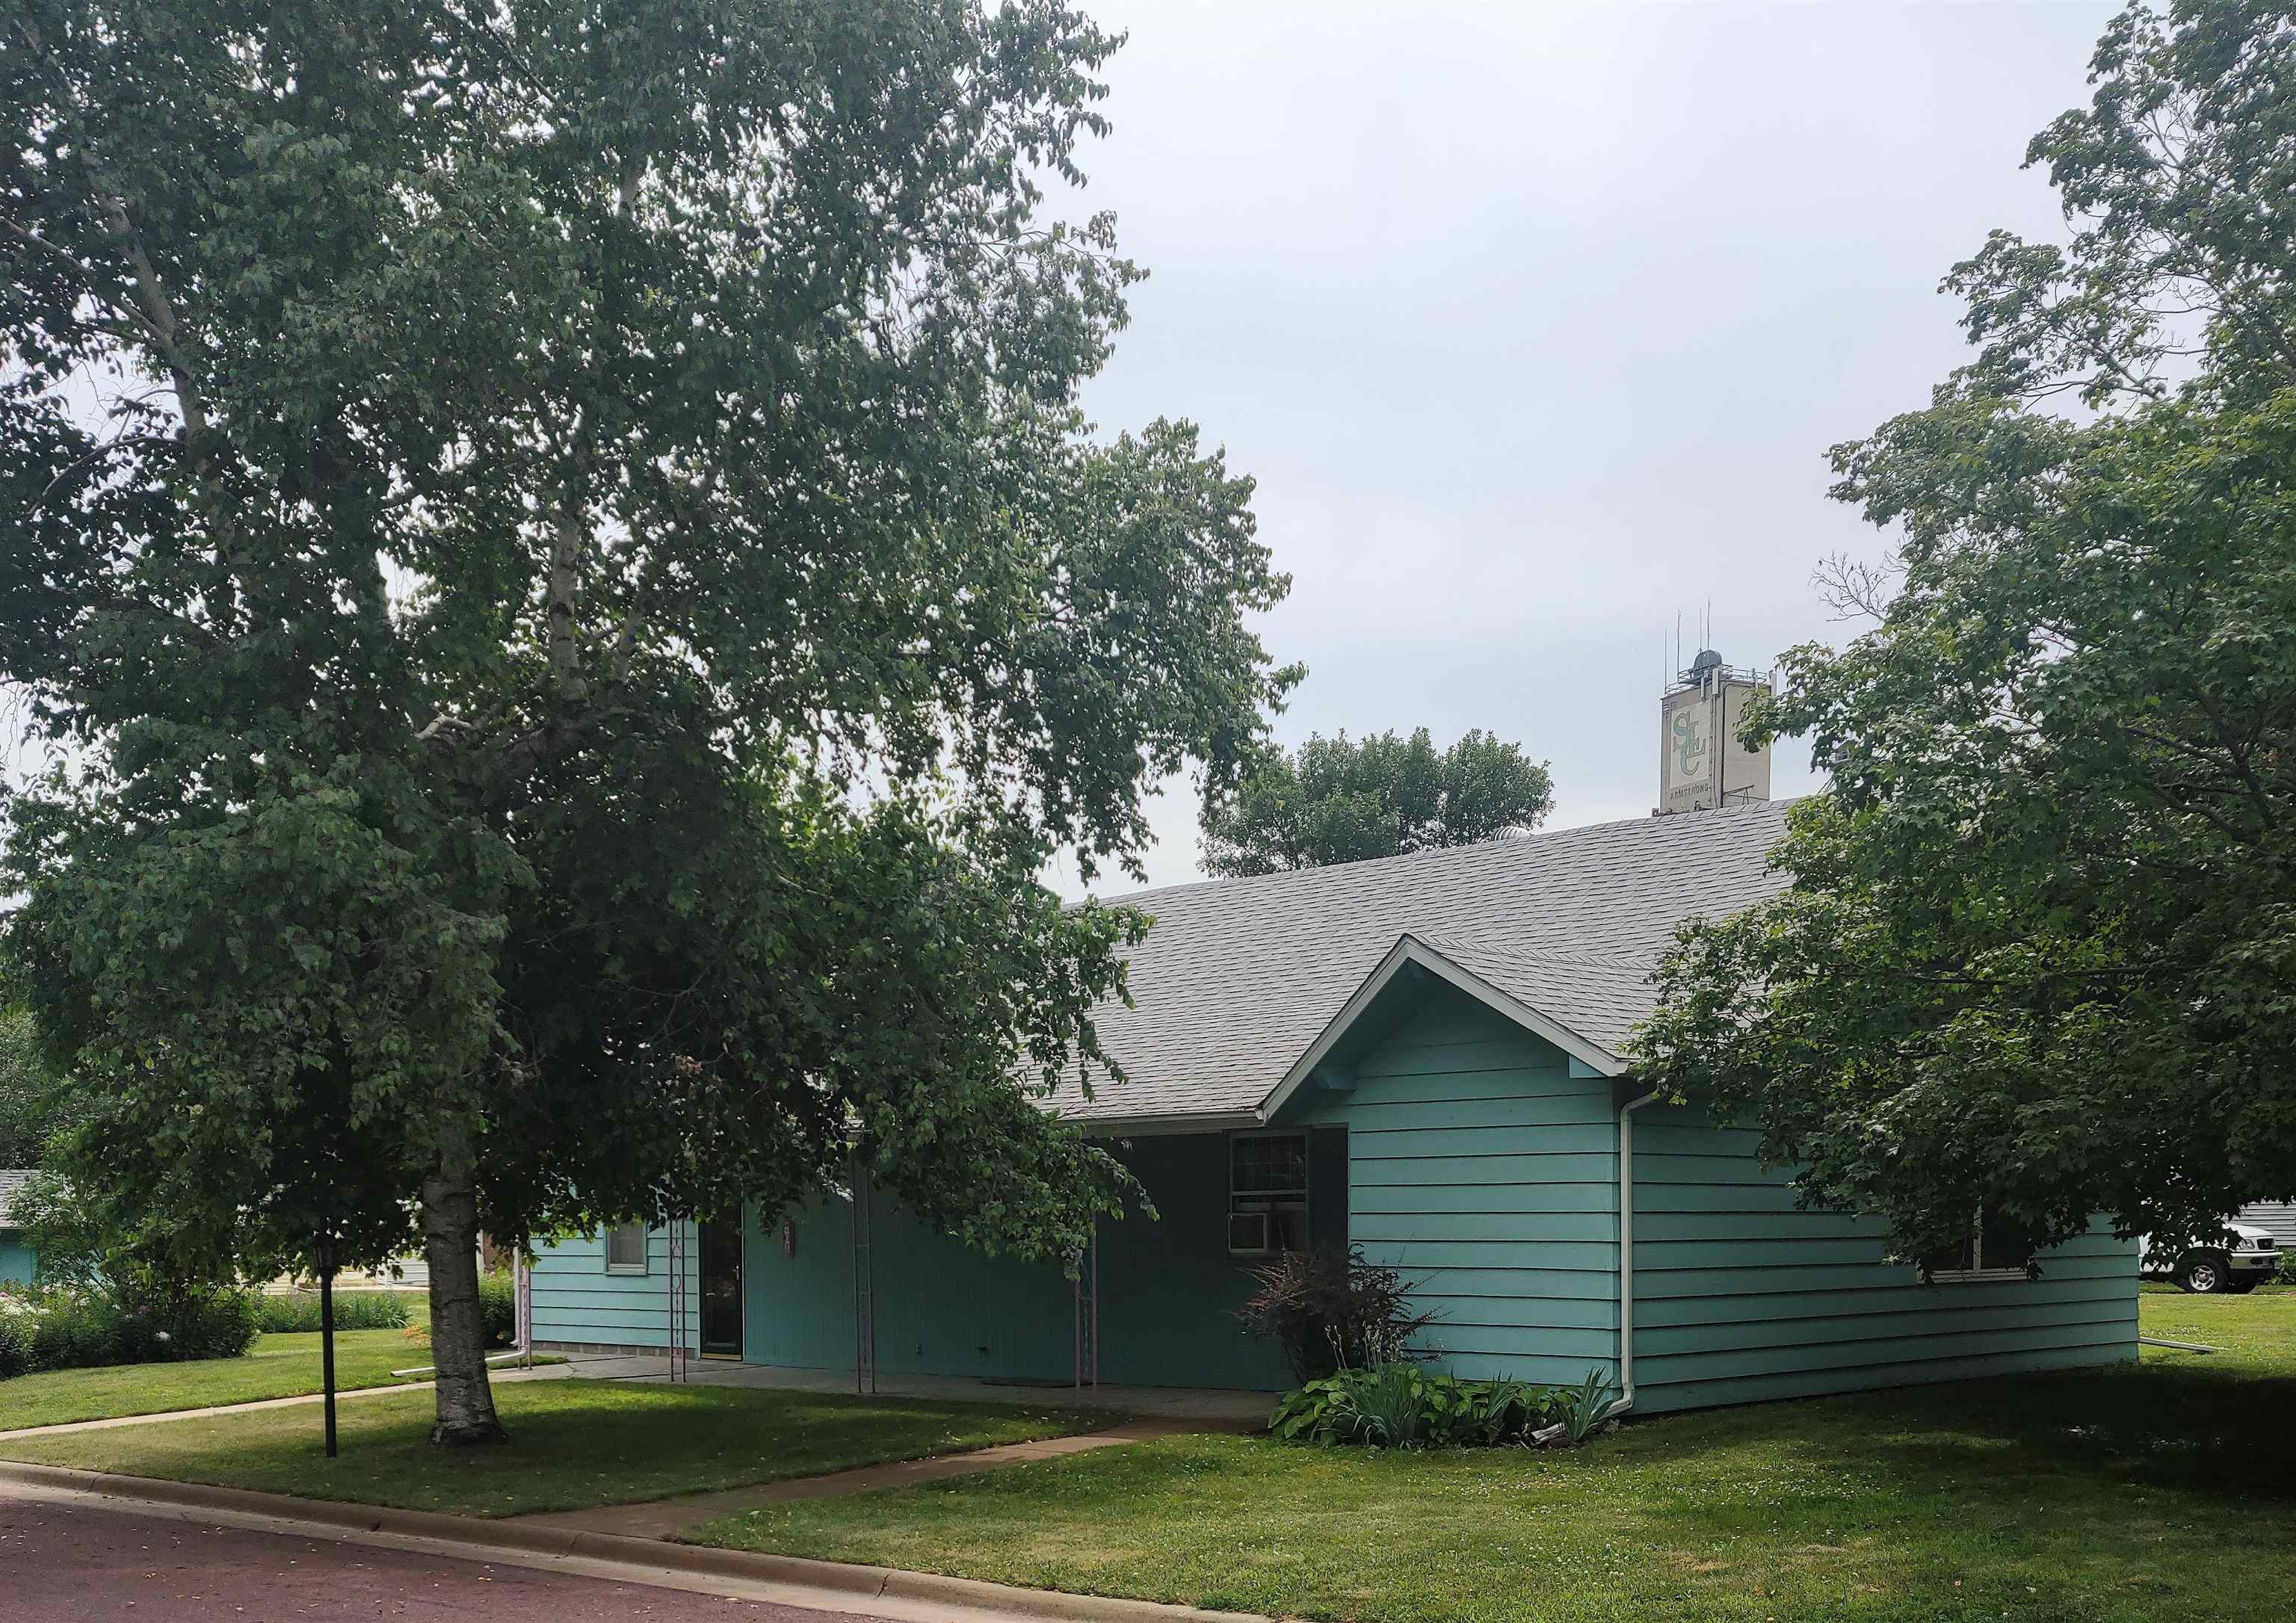 701 9th st., Armstrong, IA 50514 